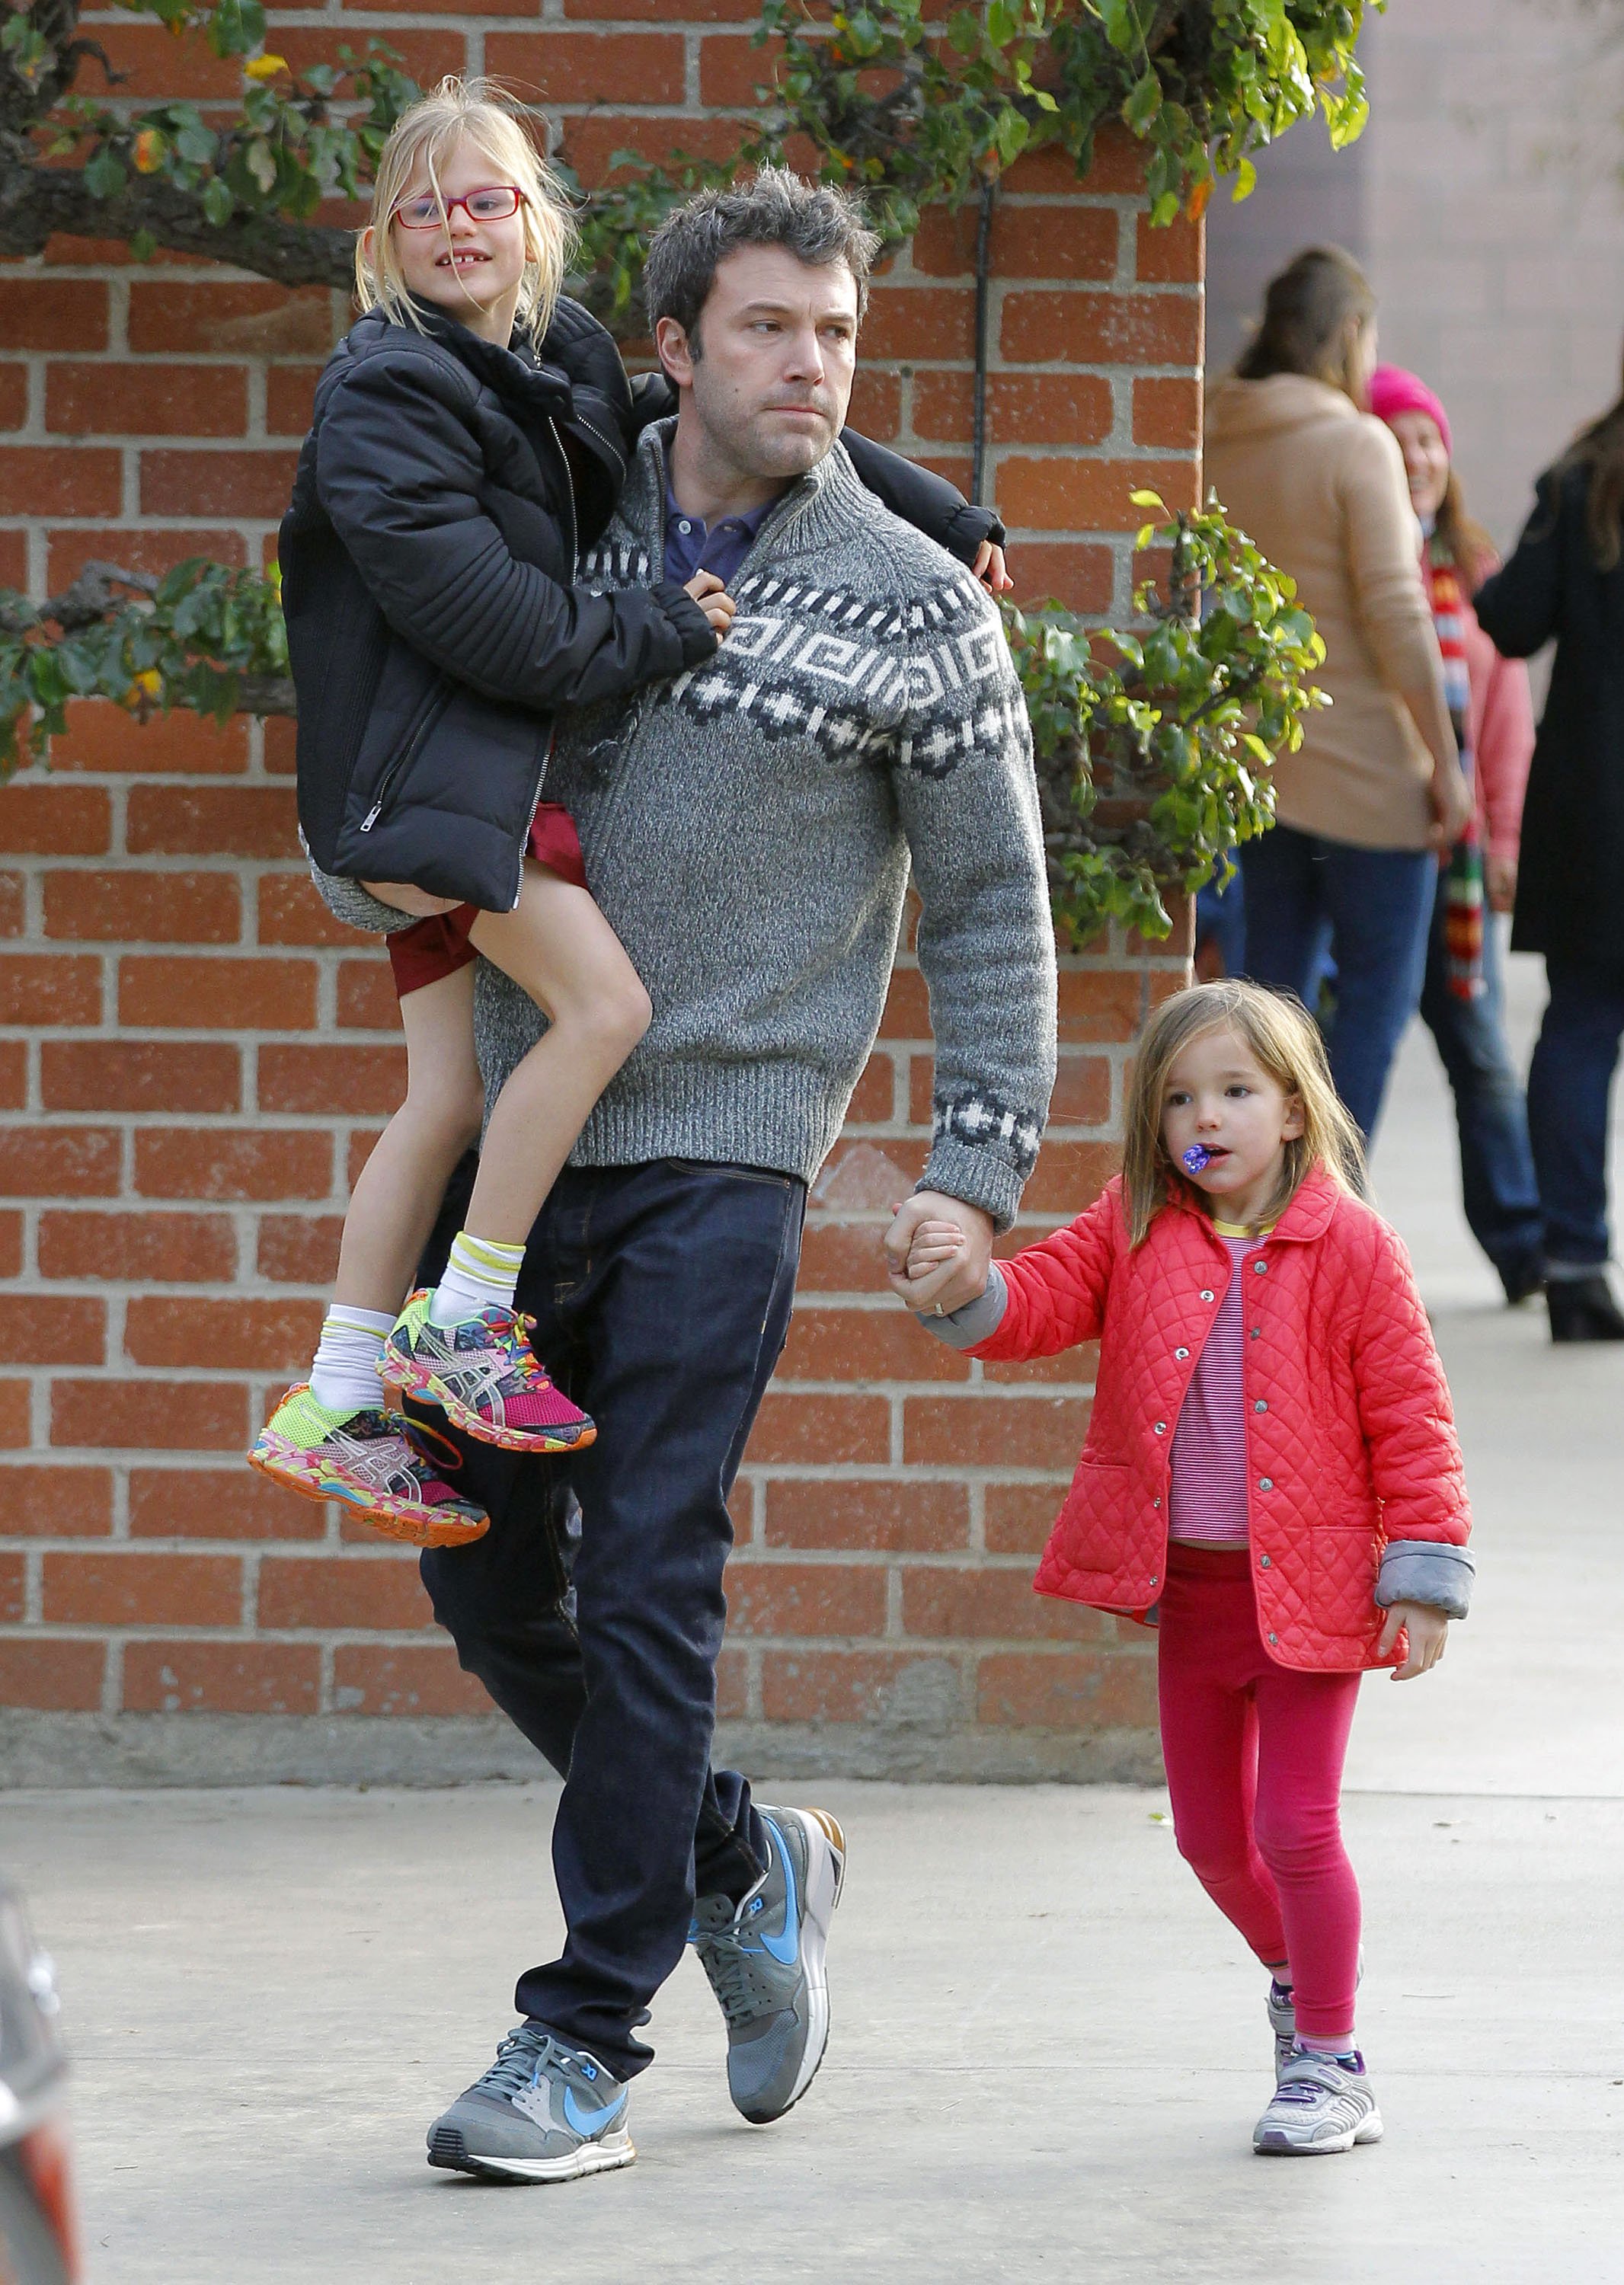 Ben Affleck and his daughters, Violet and Seraphina Affleck, spotted leaving the park on December 08, 2013 in Los Angeles, California. / Source: Getty Images